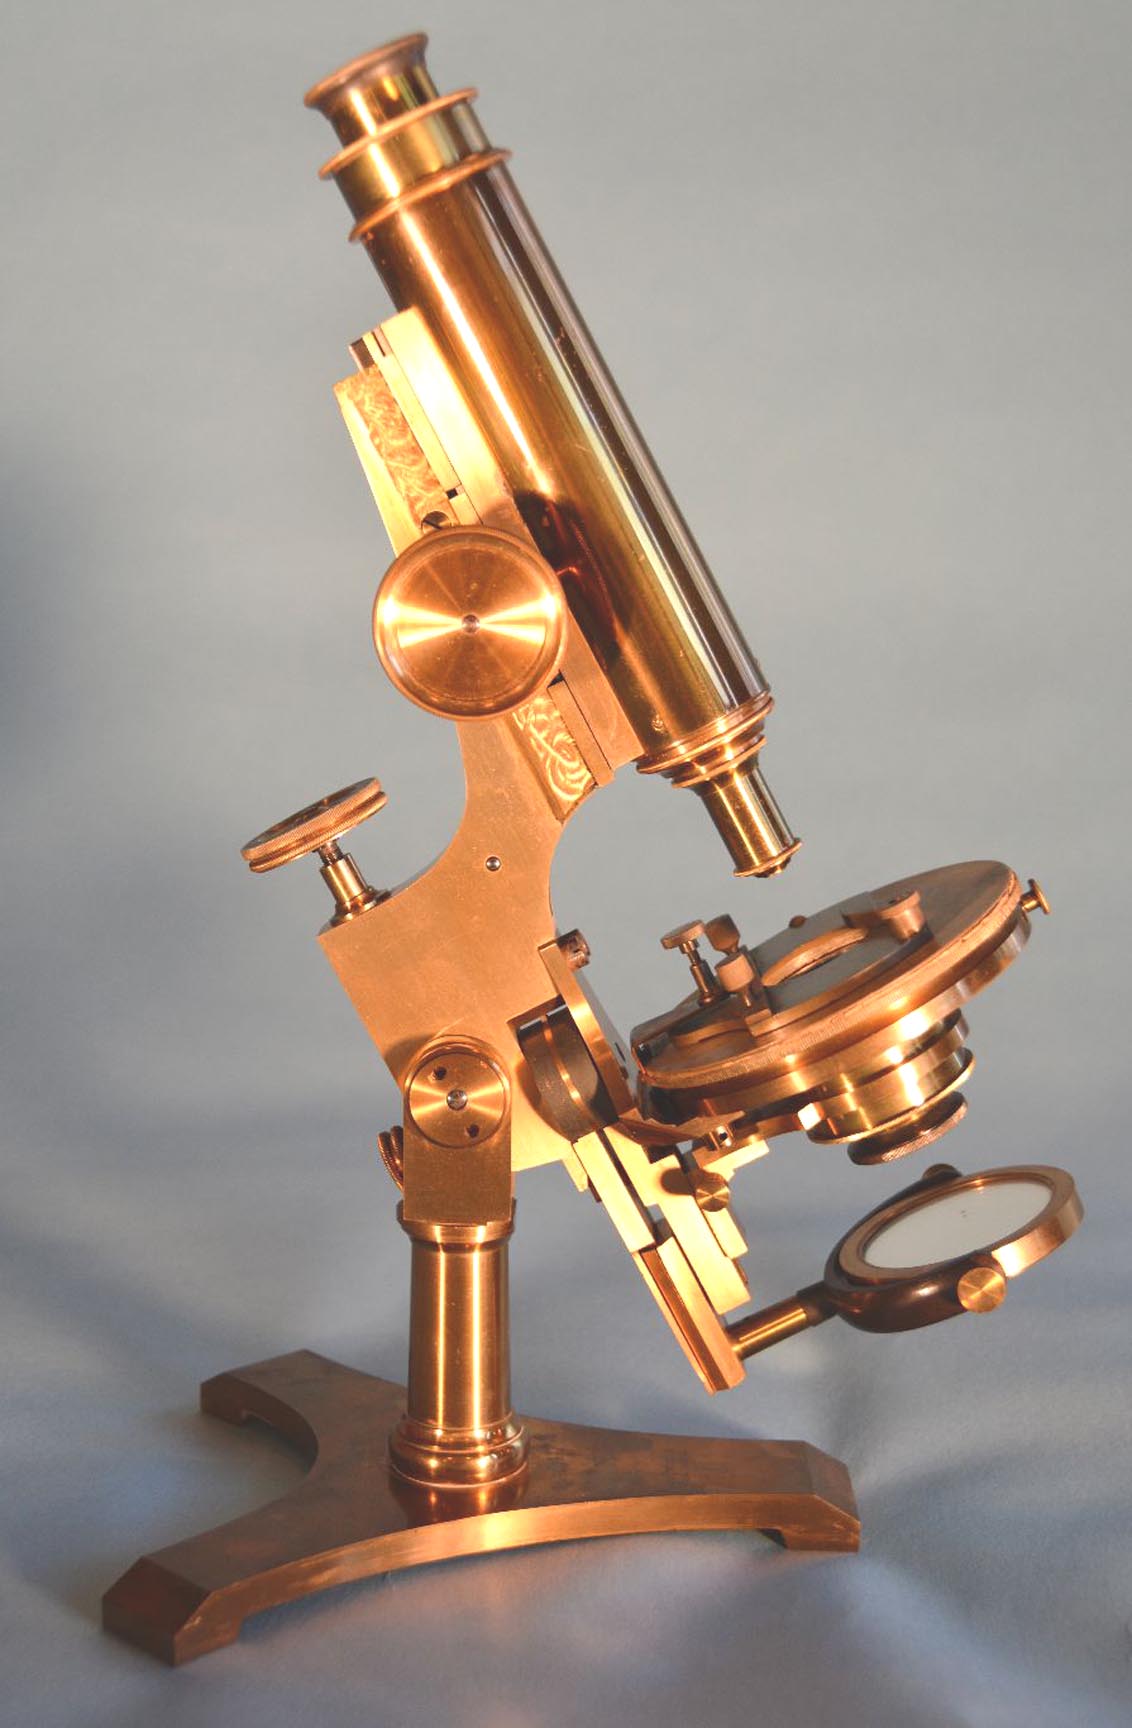 Bulloch Histological Microscope number 339